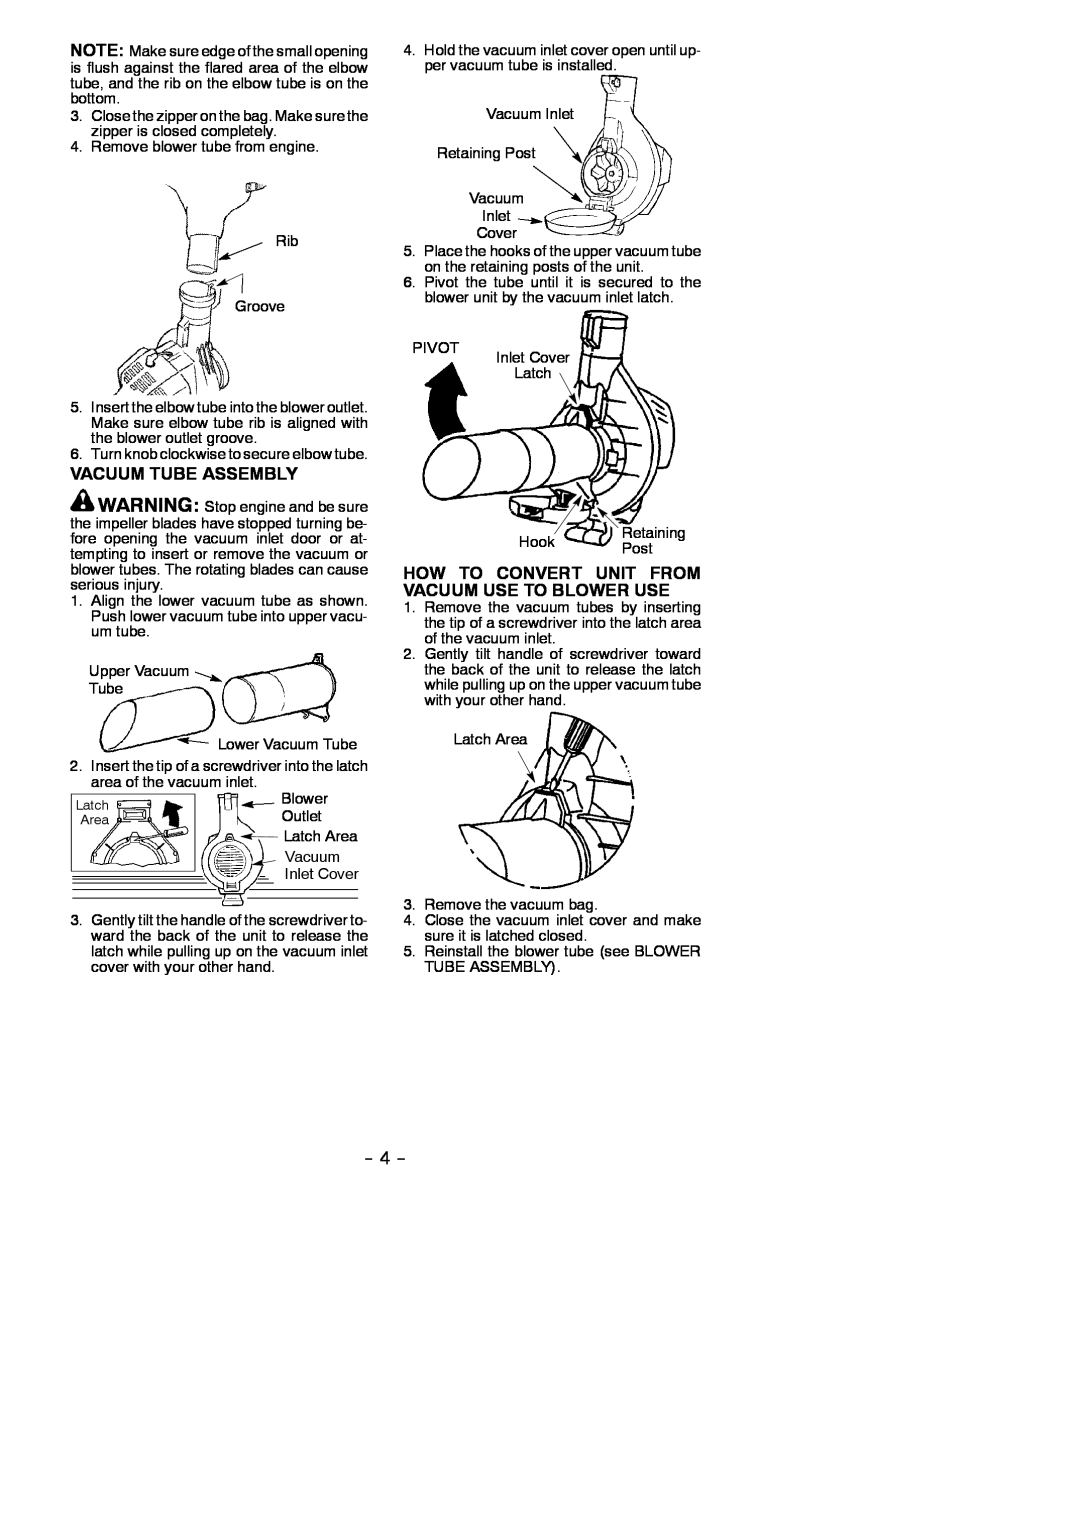 Poulan 530165213 instruction manual Vacuum Tube Assembly, How To Convert Unit From Vacuum Use To Blower Use 